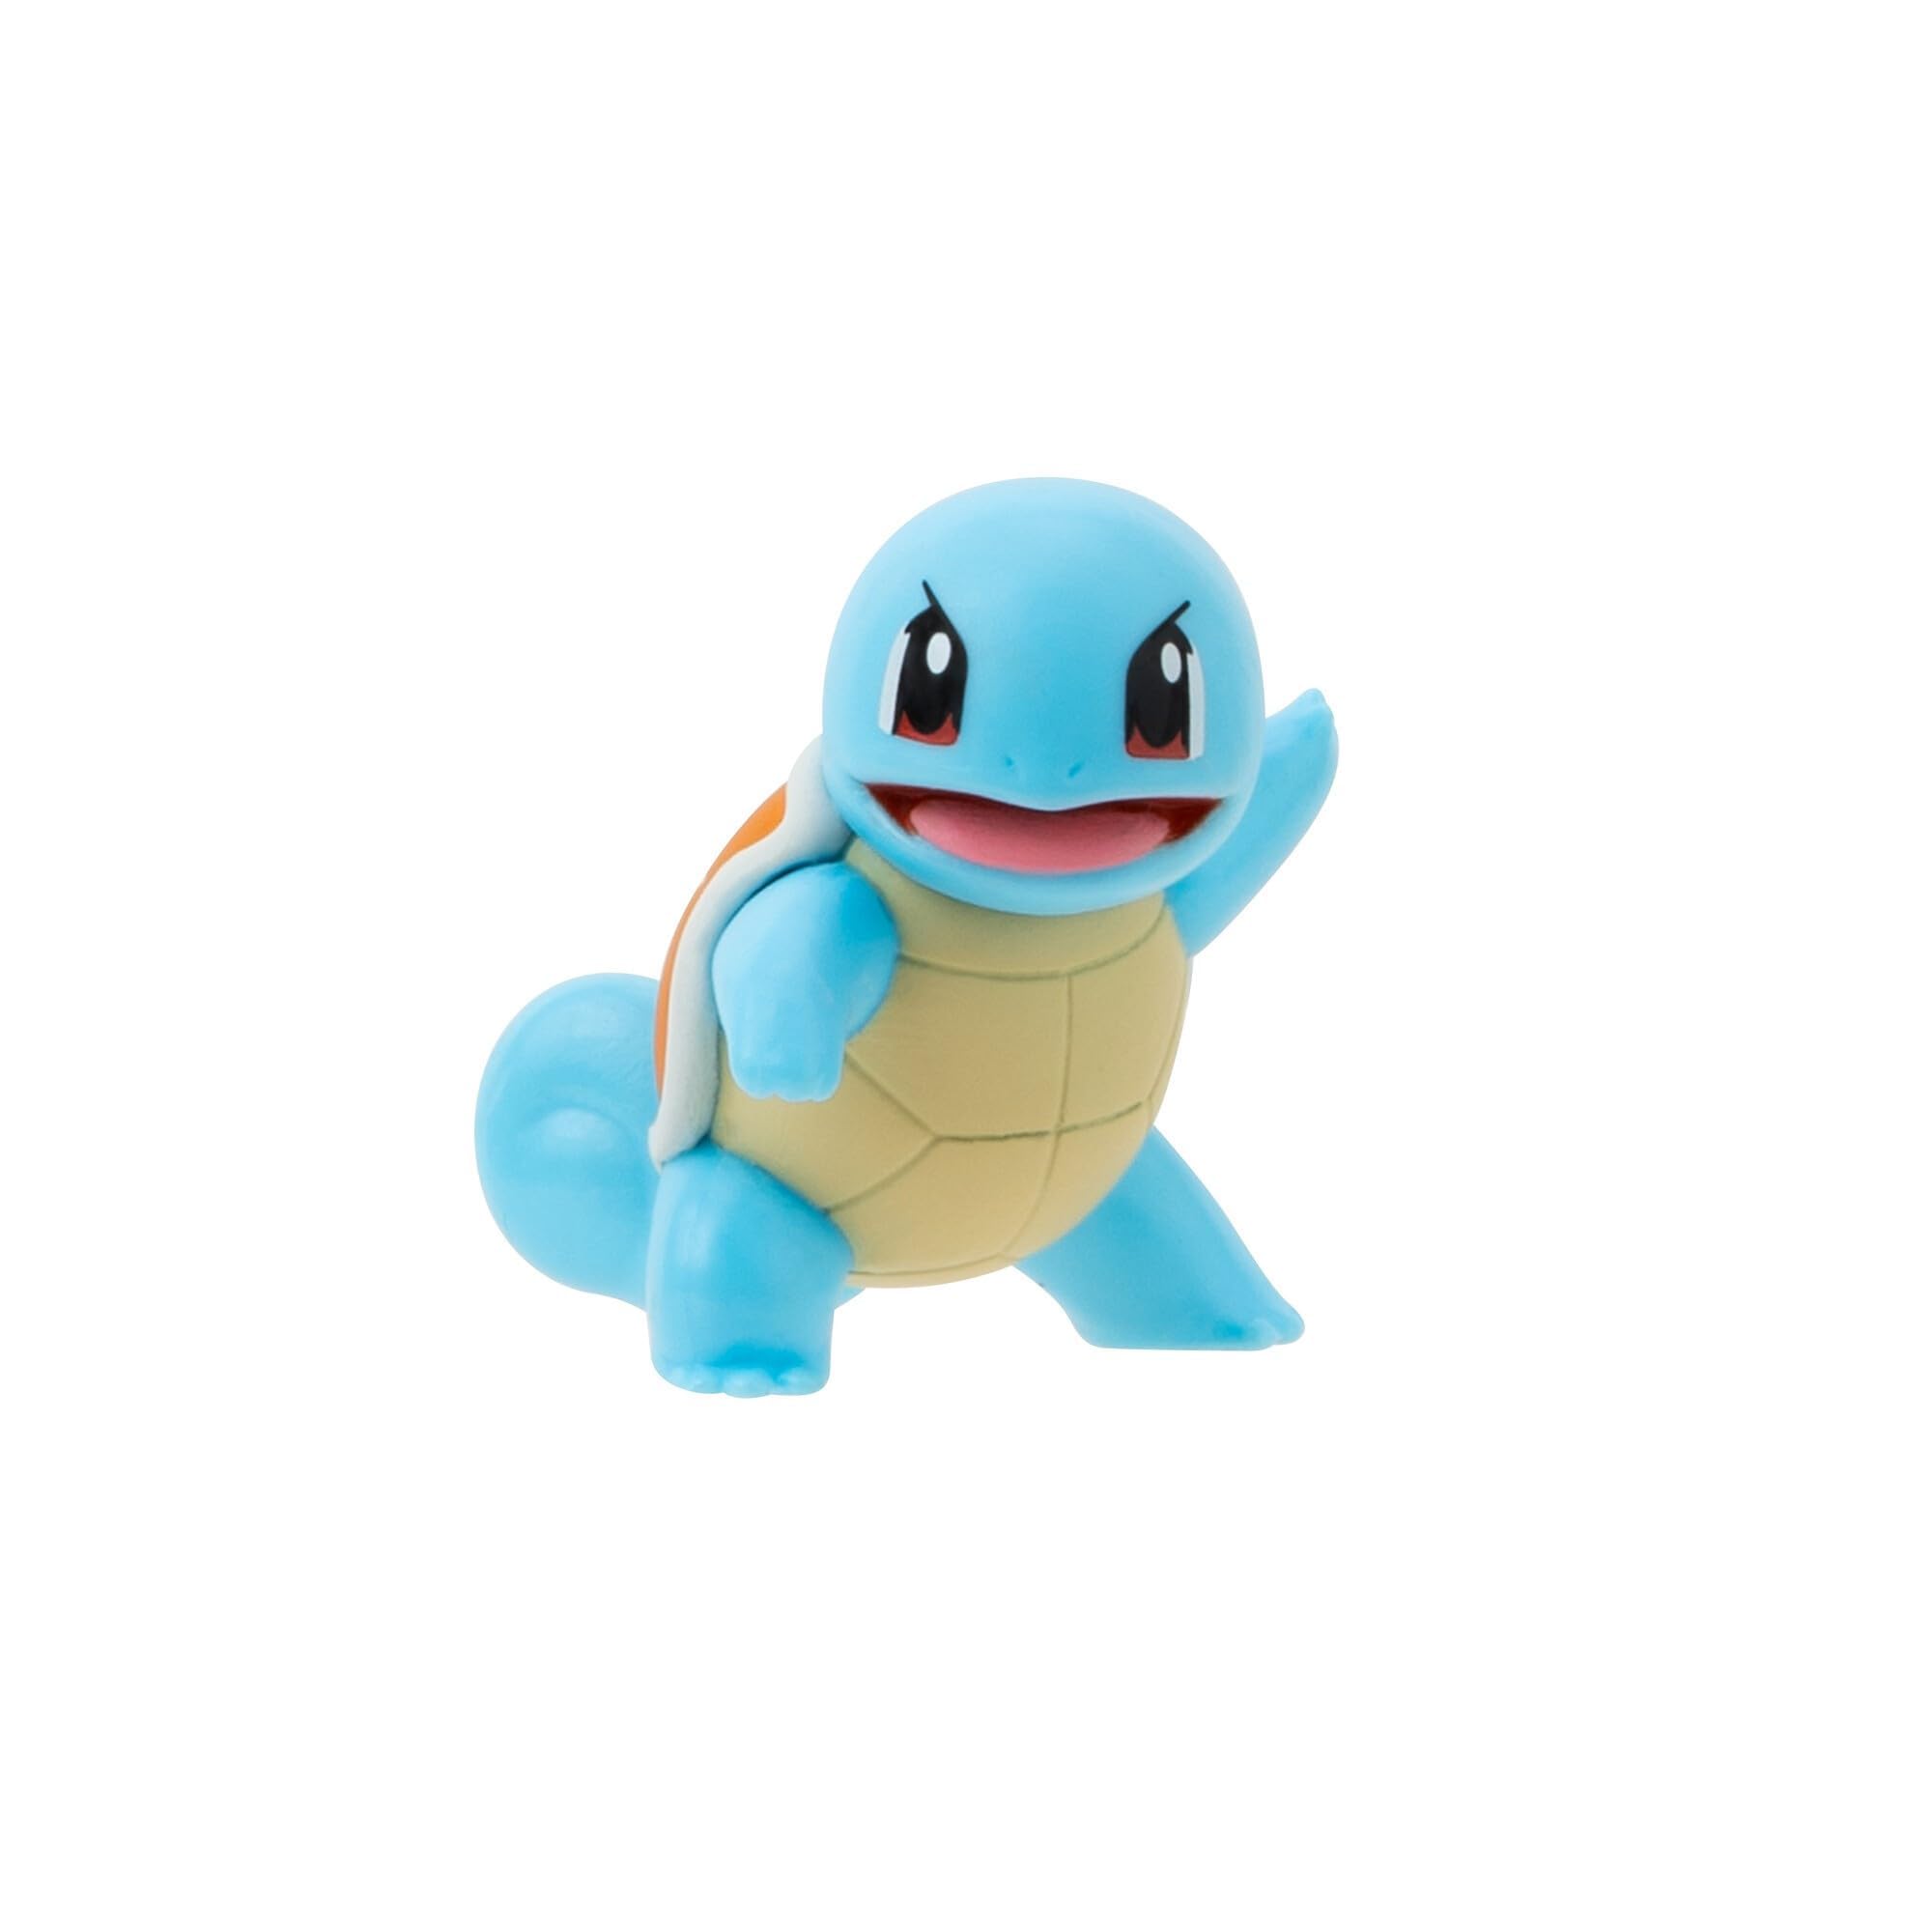 Pokemon Battle Figure 8-Pack - Comes with 2” Pikachu, 2” Bulbasaur, 2” Squirtle, 2” Charmander, 3